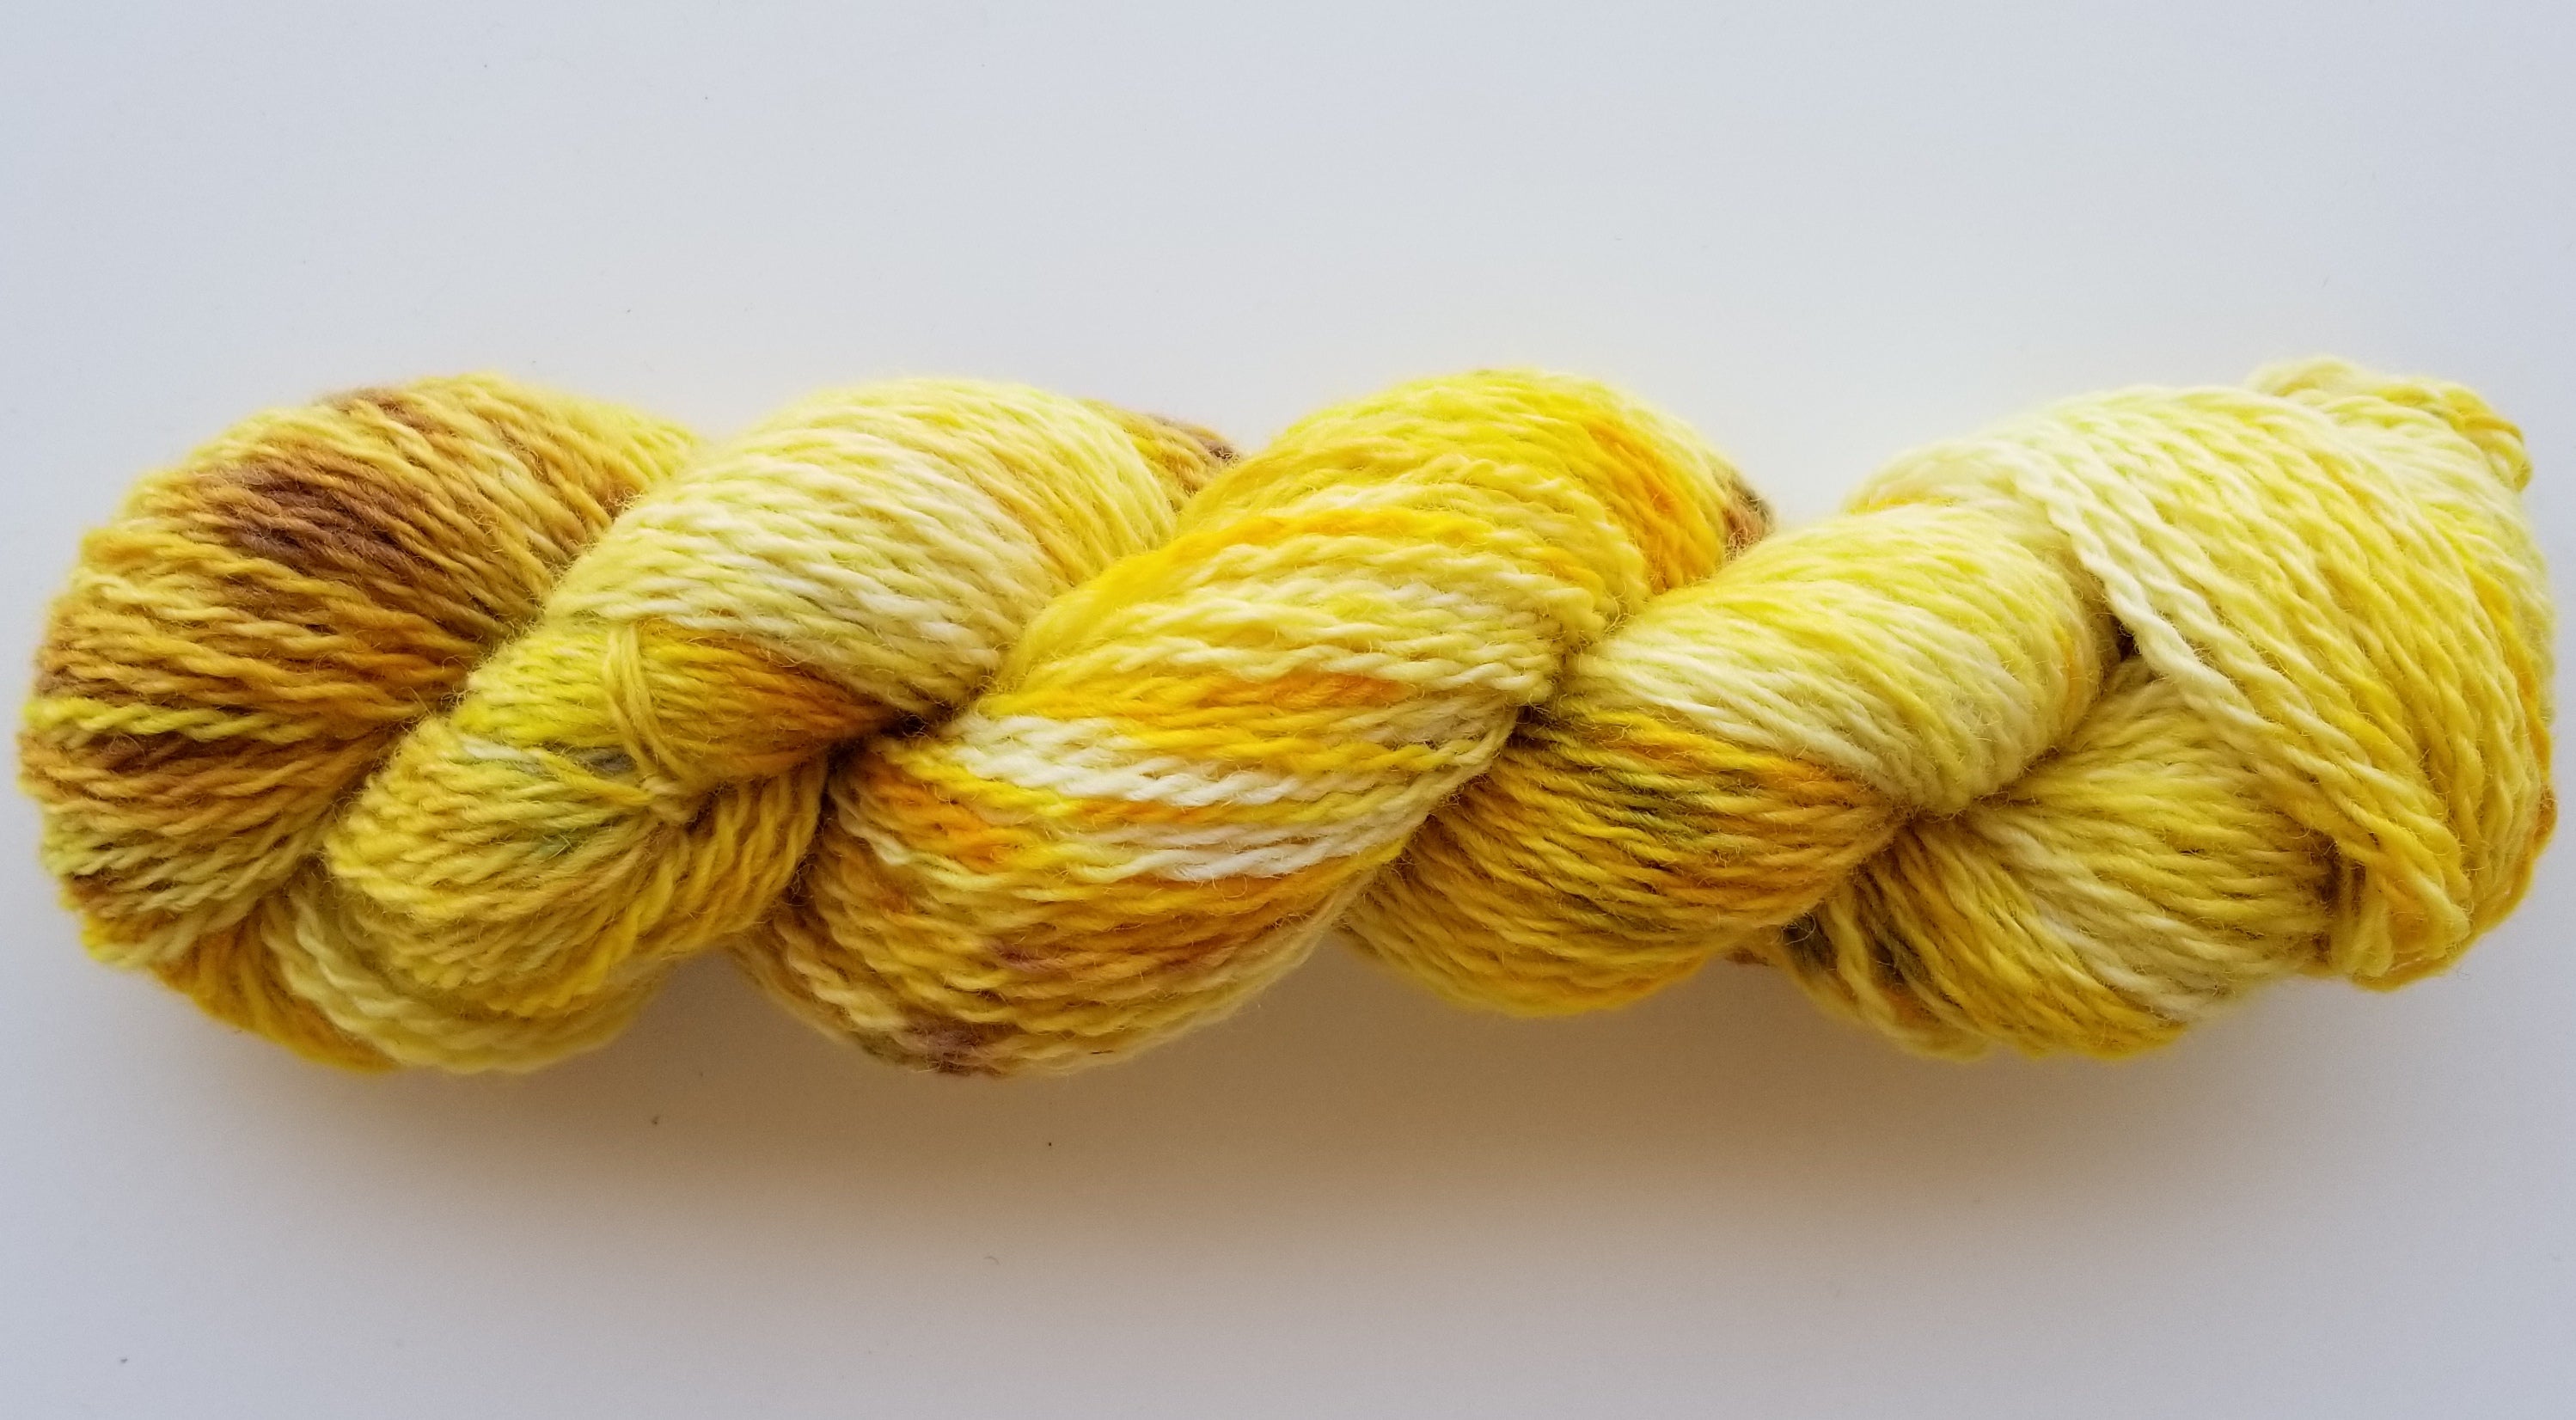 Fleece and Harmony Selkirk Worsted in Buttercups